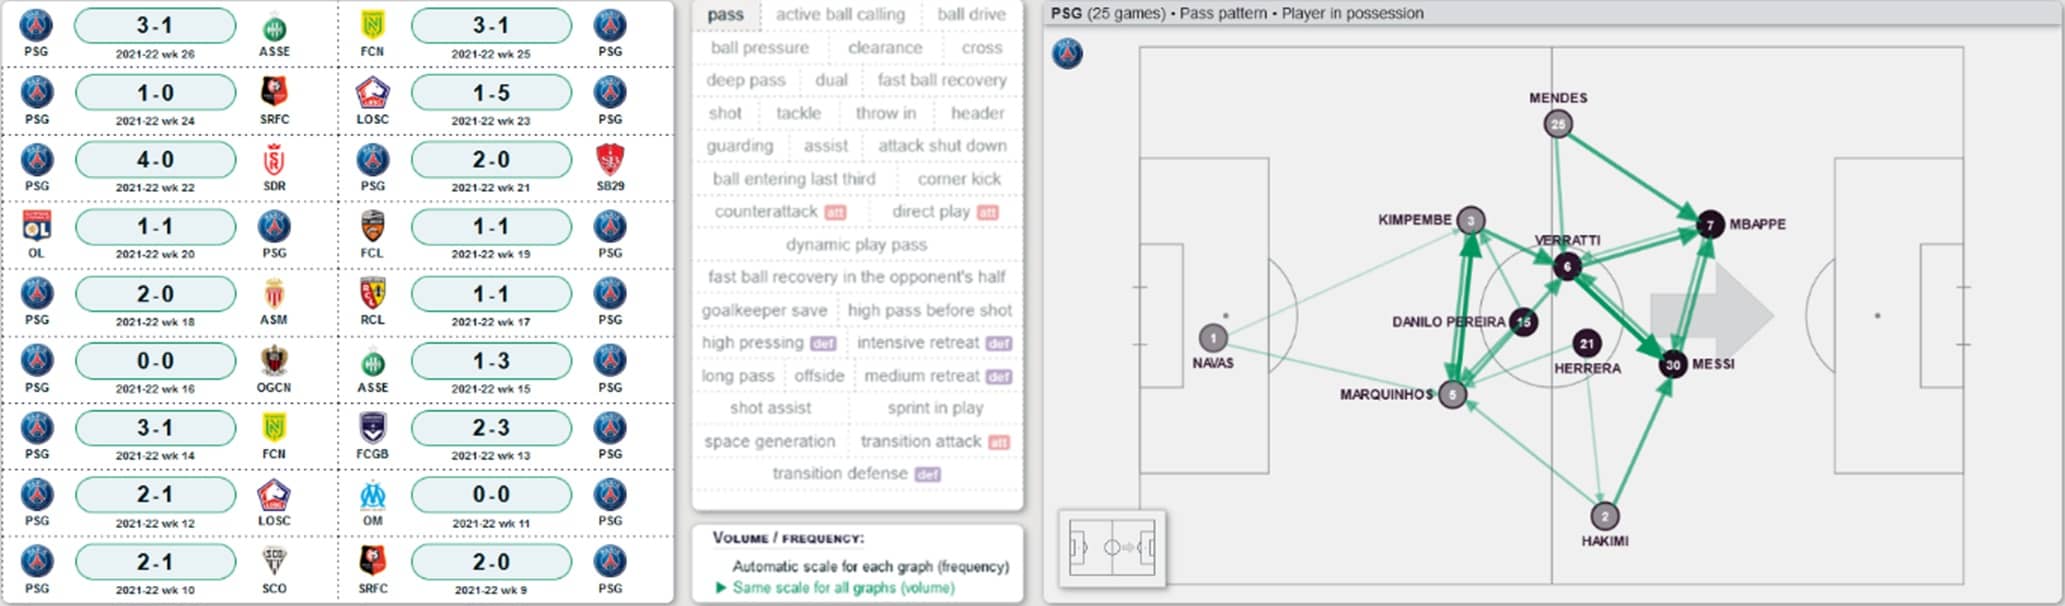 Visualise any attacking event in a game with the click of a button